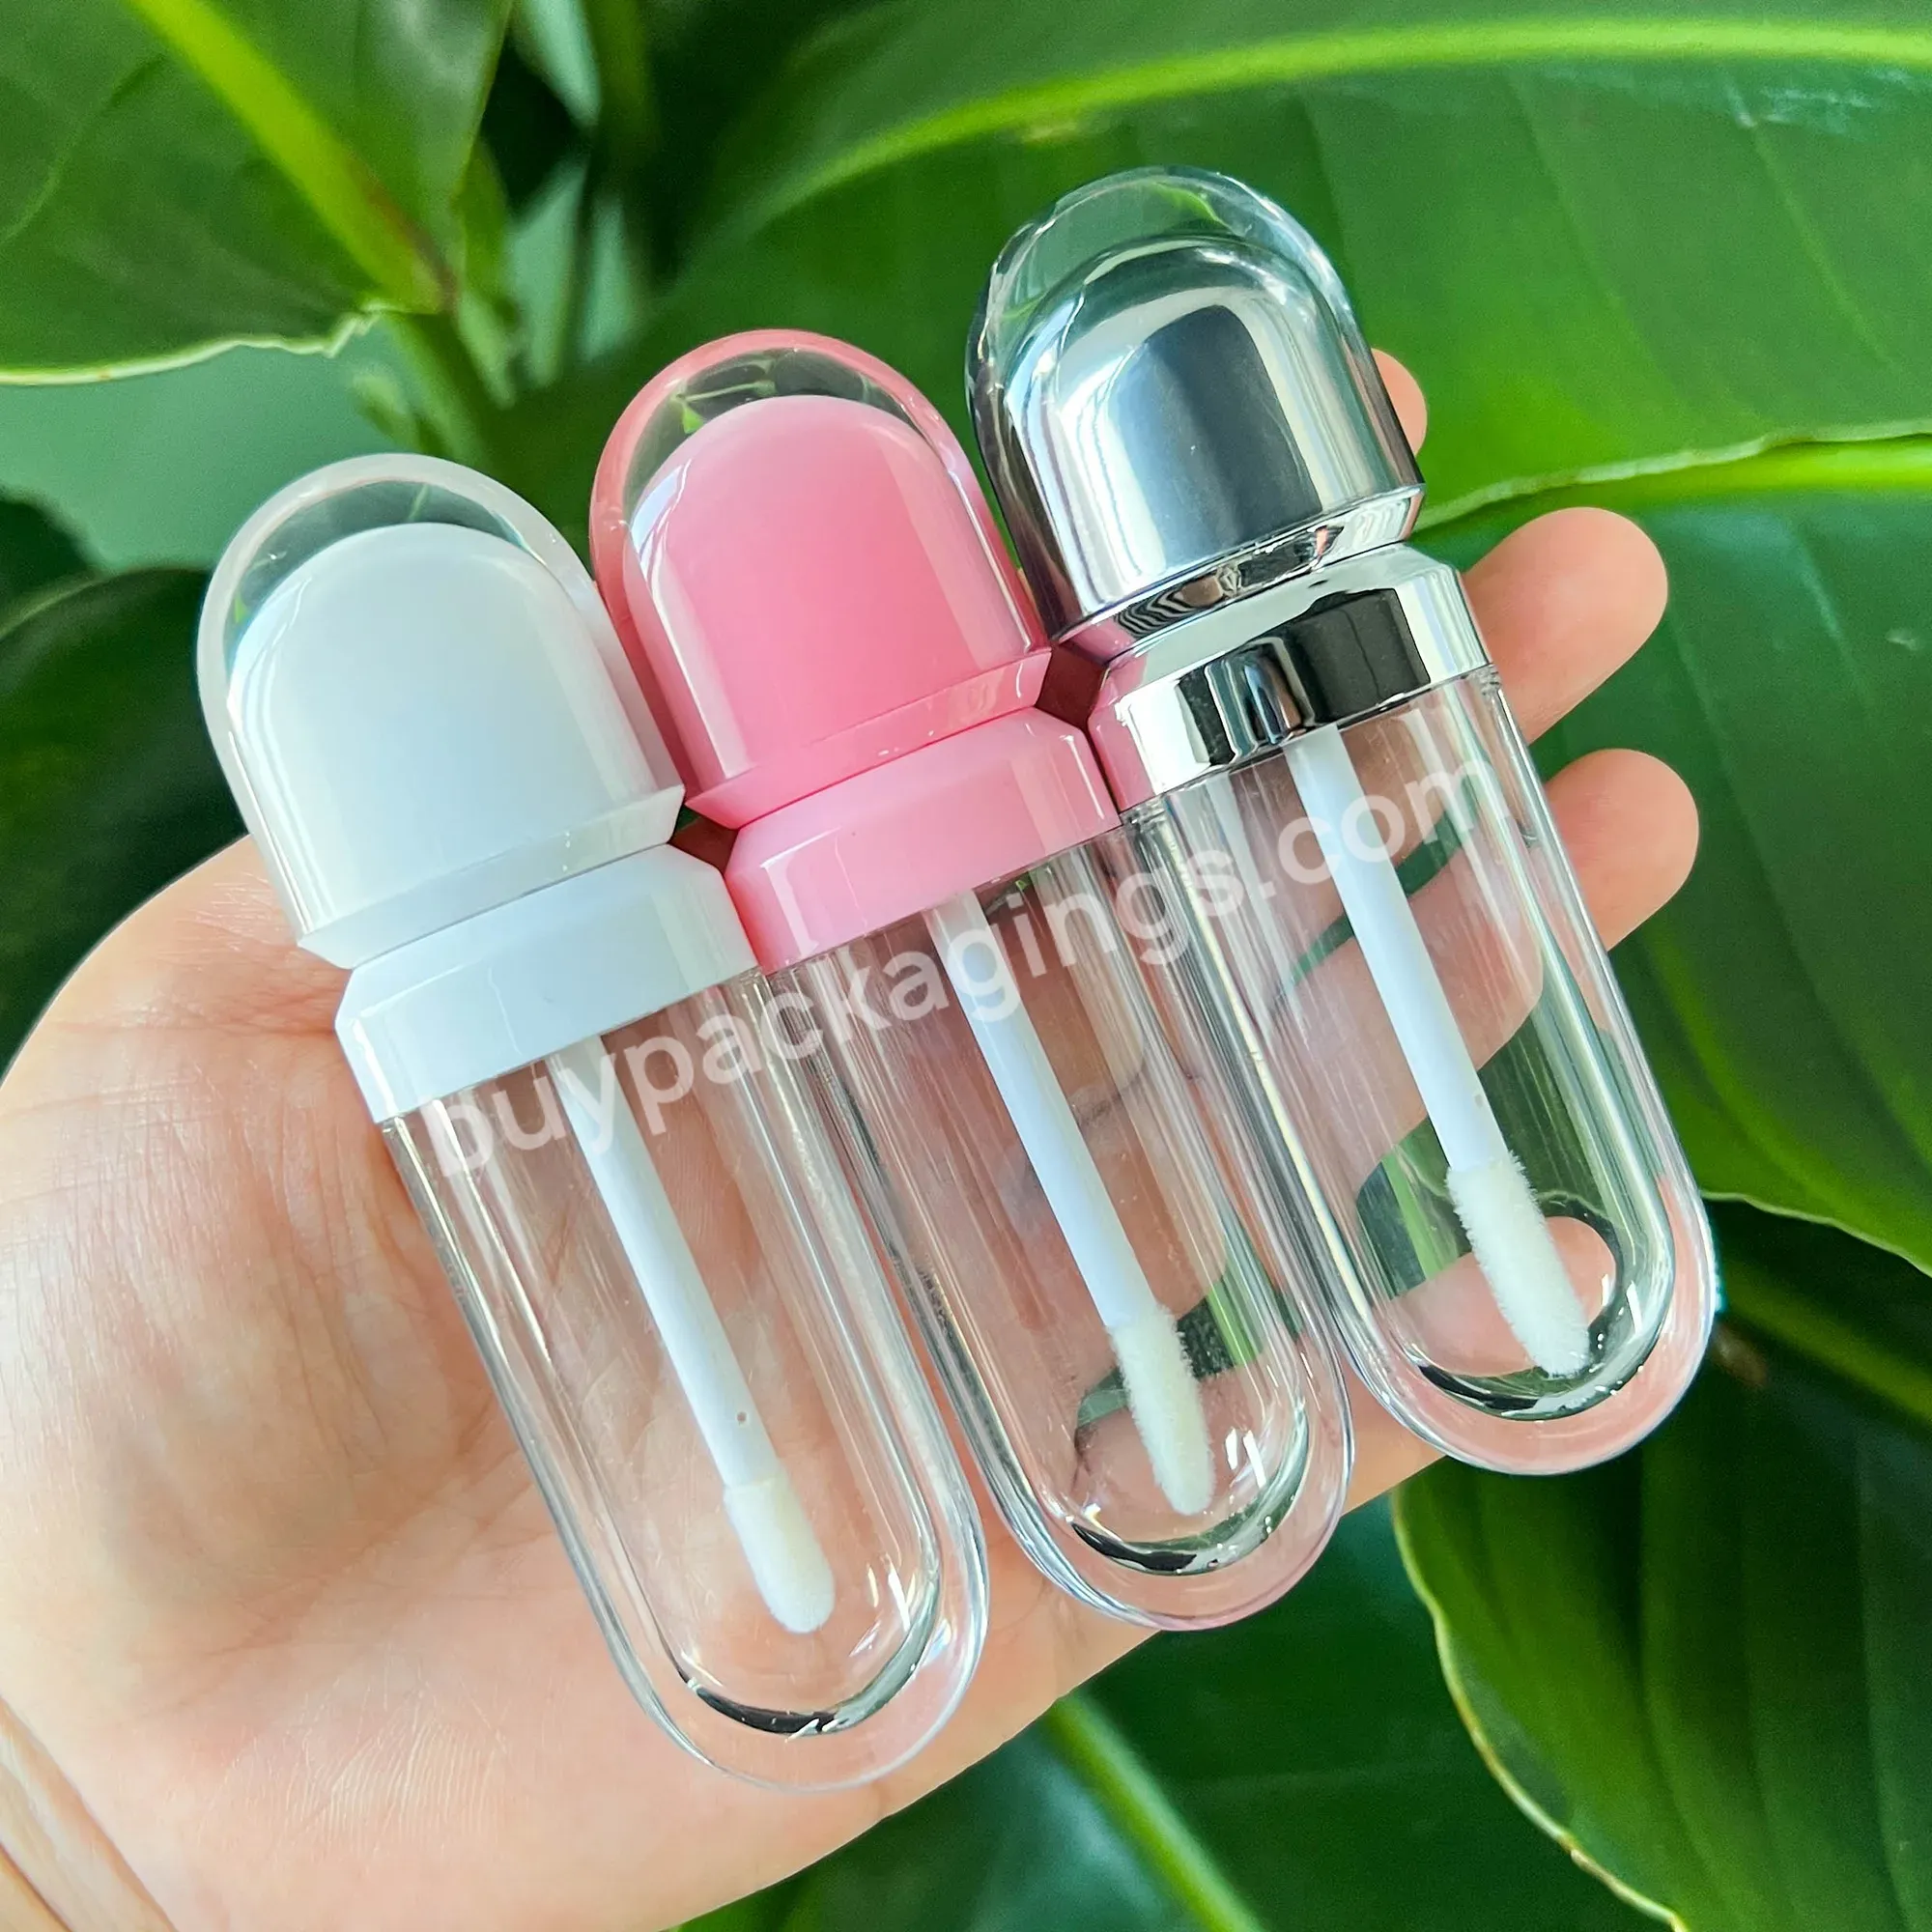 Oval Flat Lipgloss Tube Luxury Lip Tint Container For Makeup Special Flat Shape Lip Gloss Bottles 8ml - Buy Flat Plastic Color Tubes Pink Candy Shaped Lipgloss,Flat Plastic Transparent Tube Clear Liptint Tube With Brush,Empty 8ml Tubes Oval Flat Lip